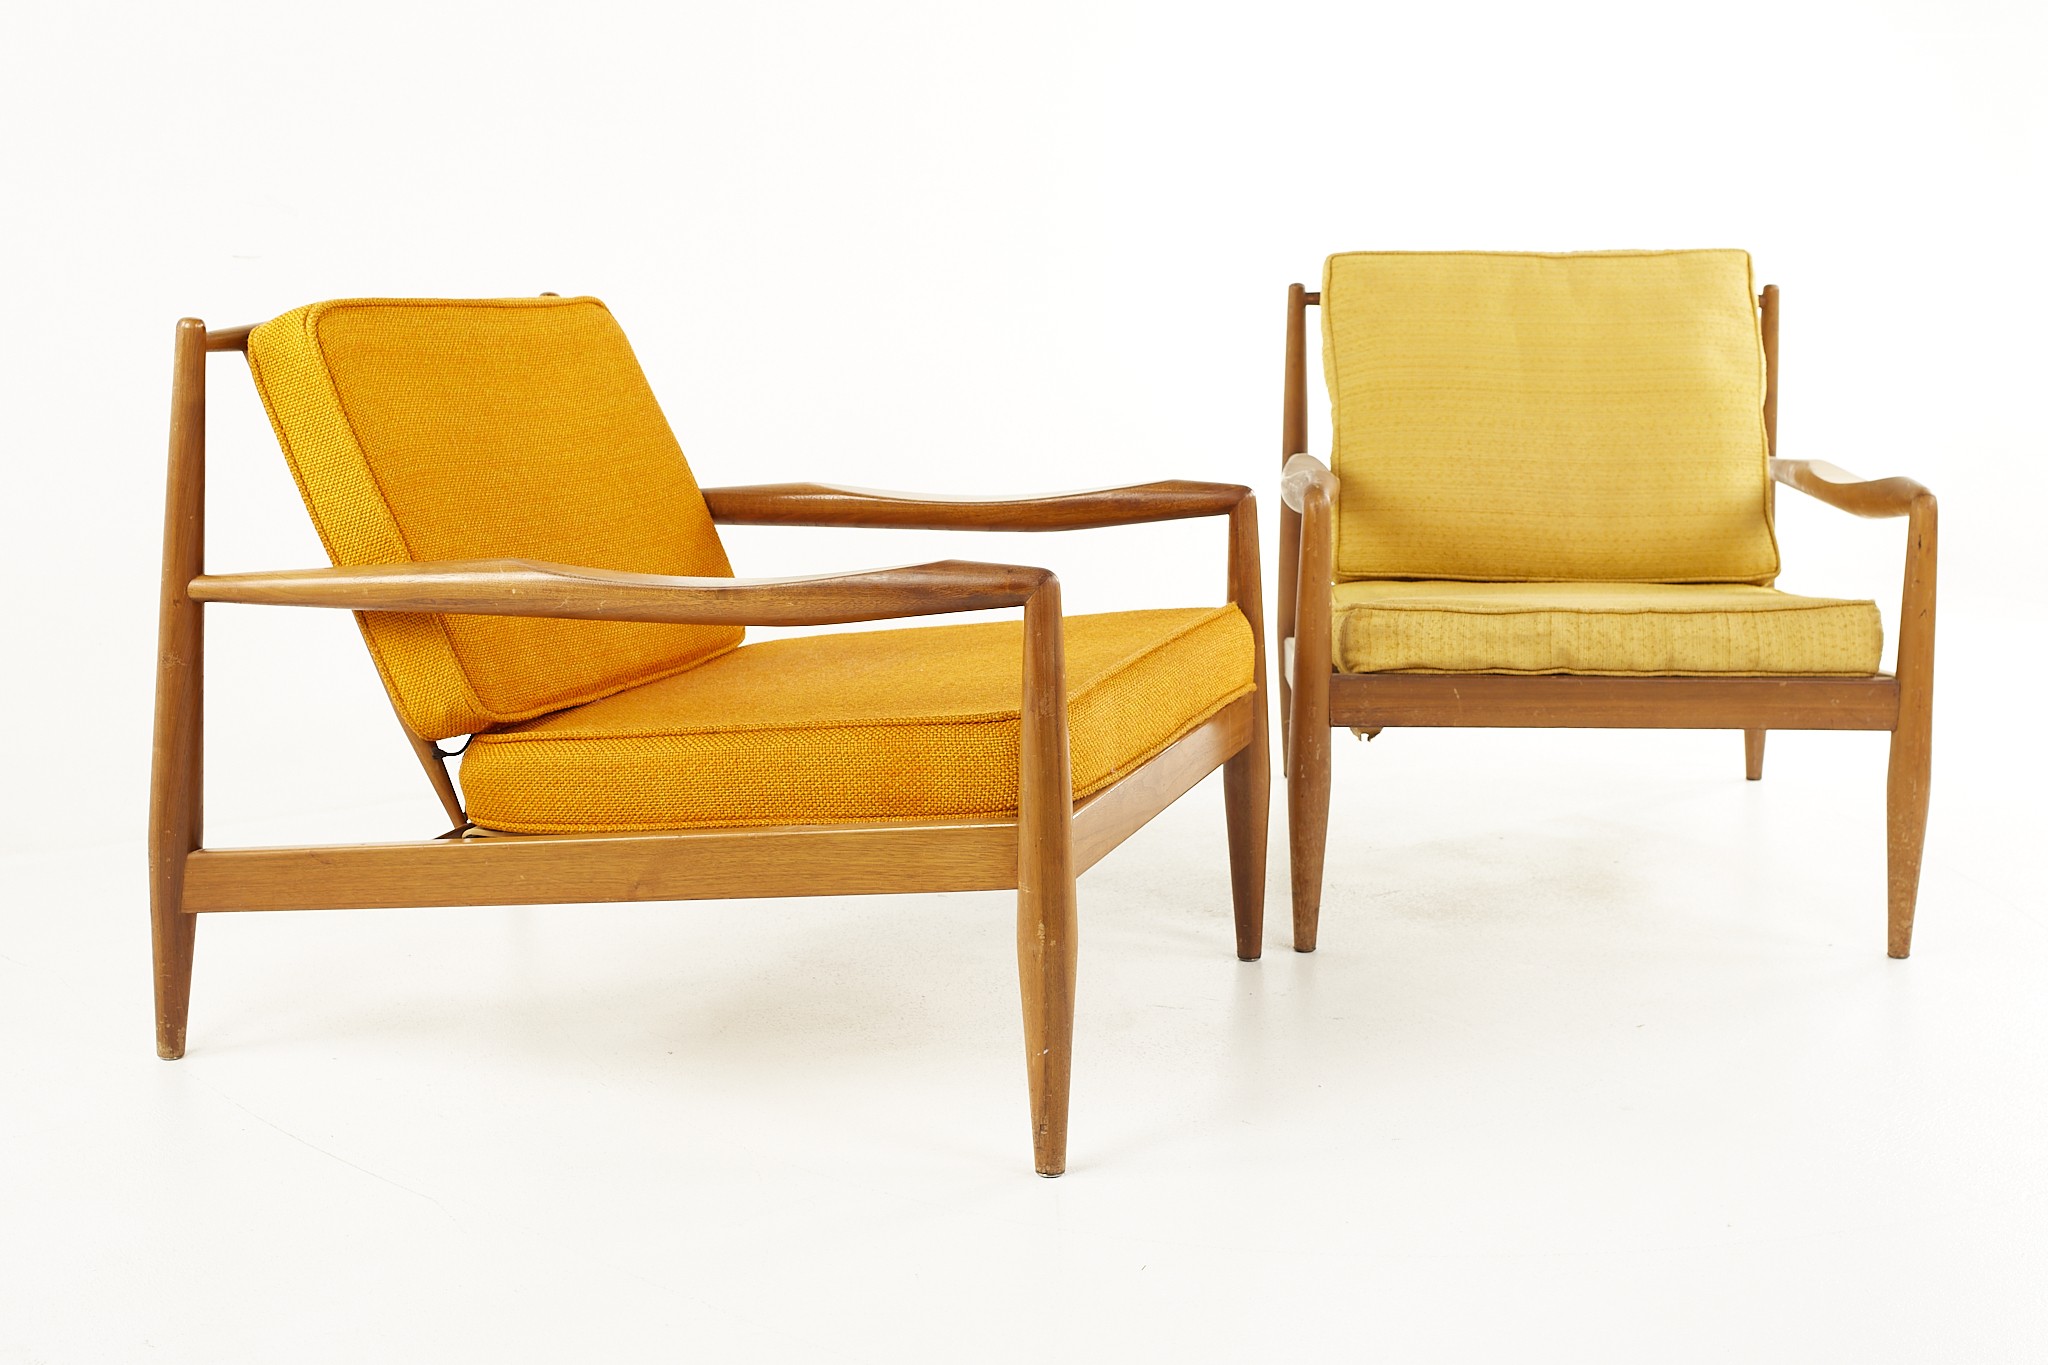 Adrian Pearsall for Craft Associates Mid Century Spindle Back Lounge Chair - a Pair